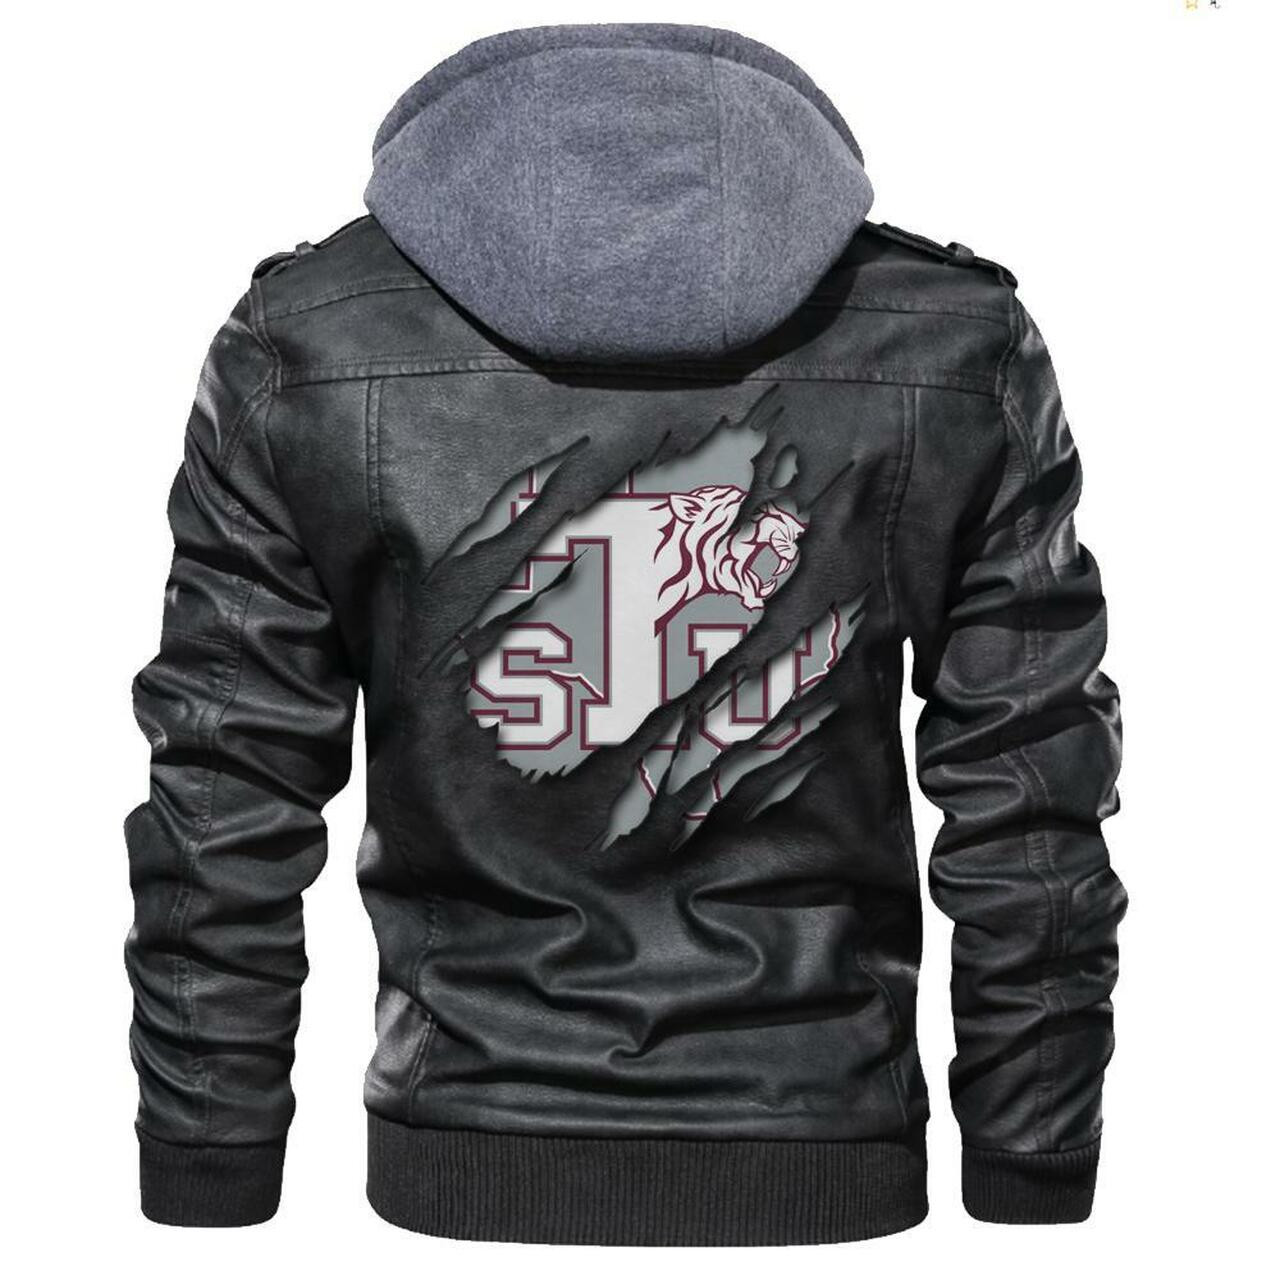 Top leather jacket can keep you warm on cooler days 164